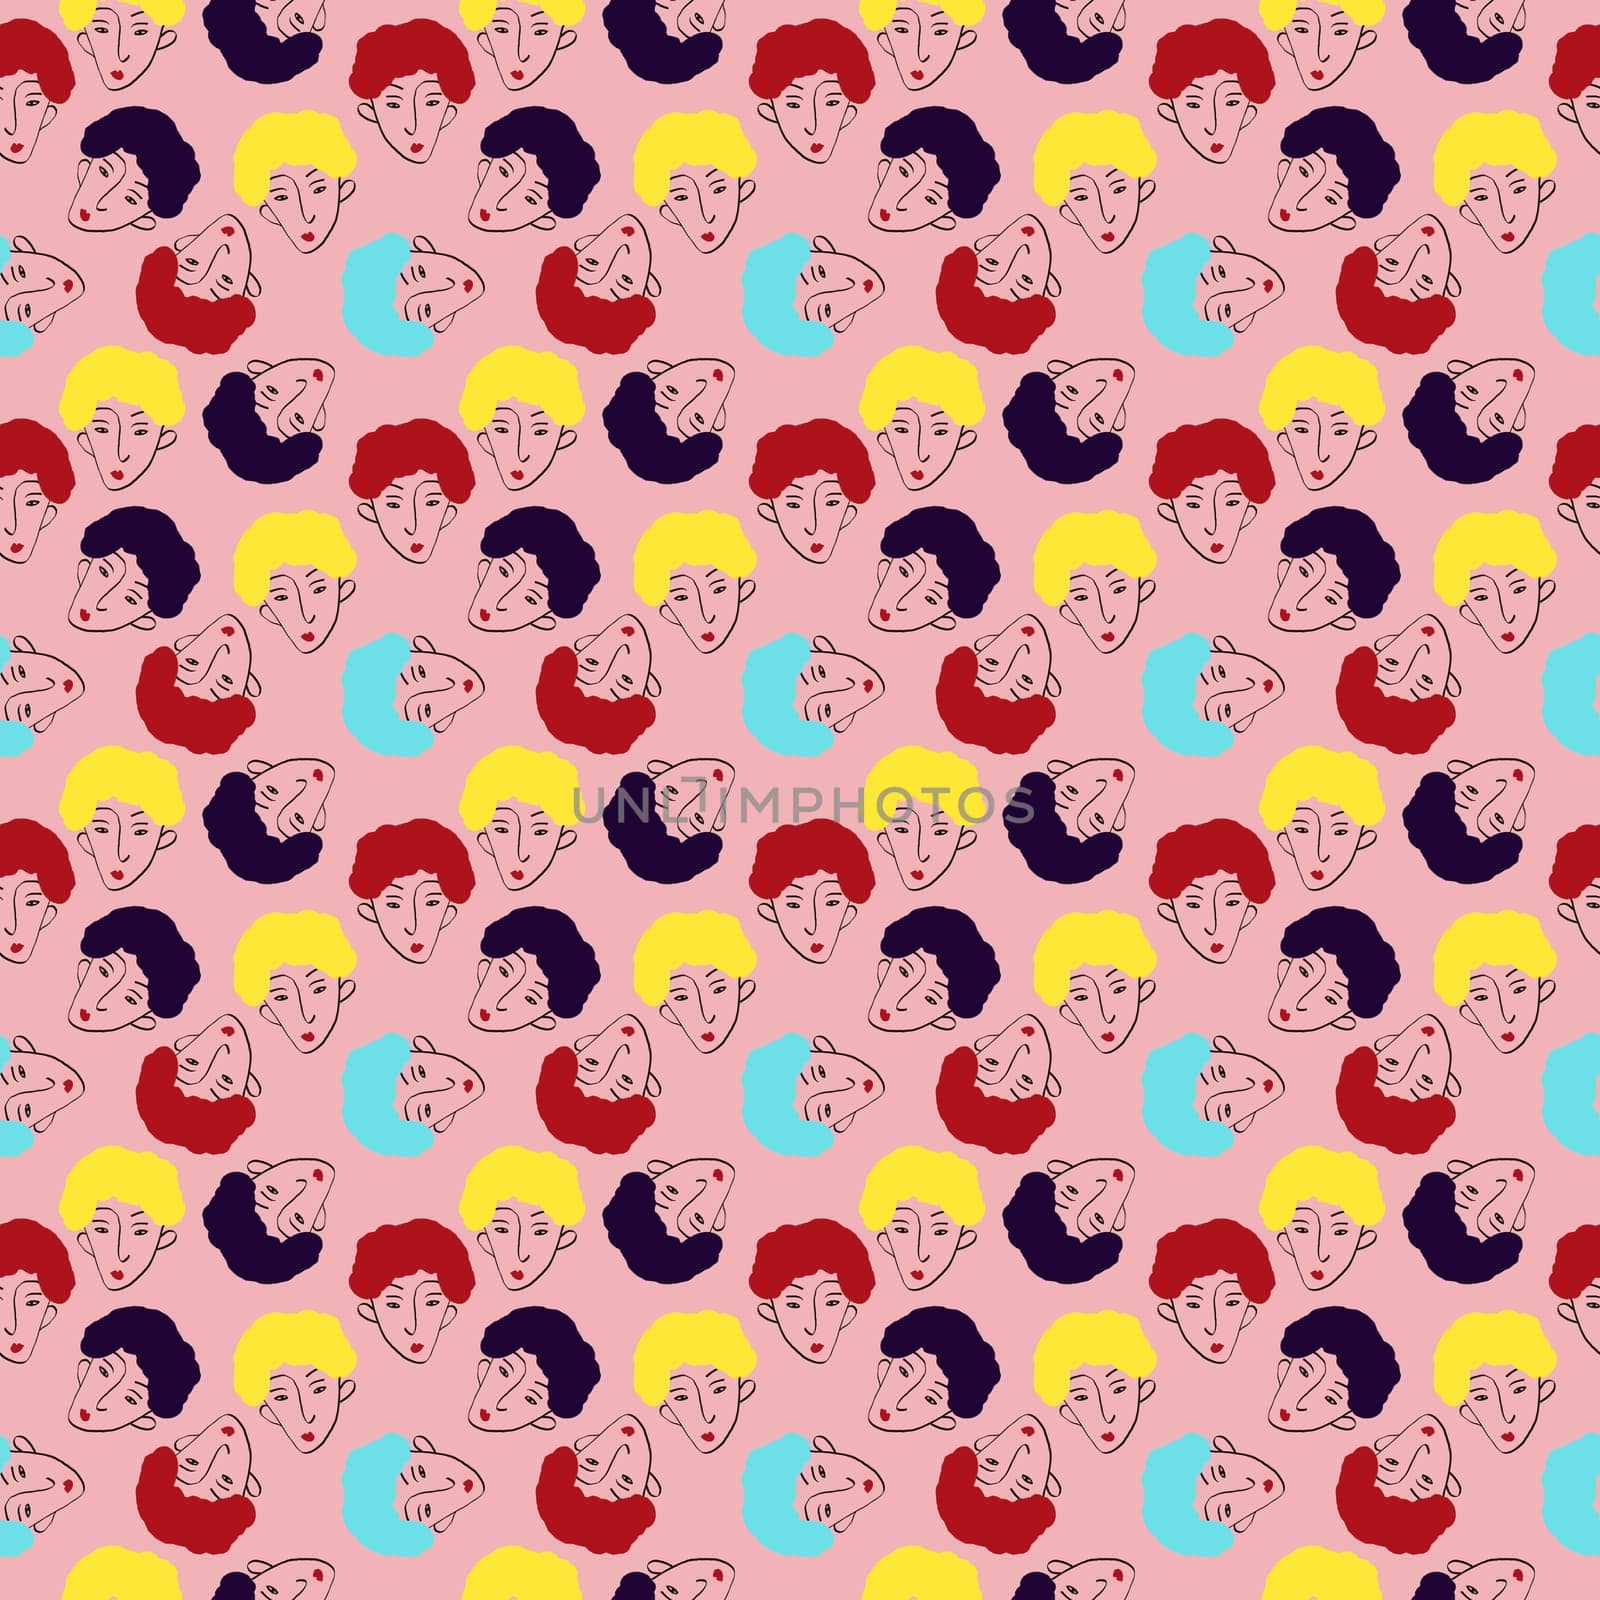 fancy bizarre angels and heart Valentines Day pattern. Modern Illustration in a doodle style